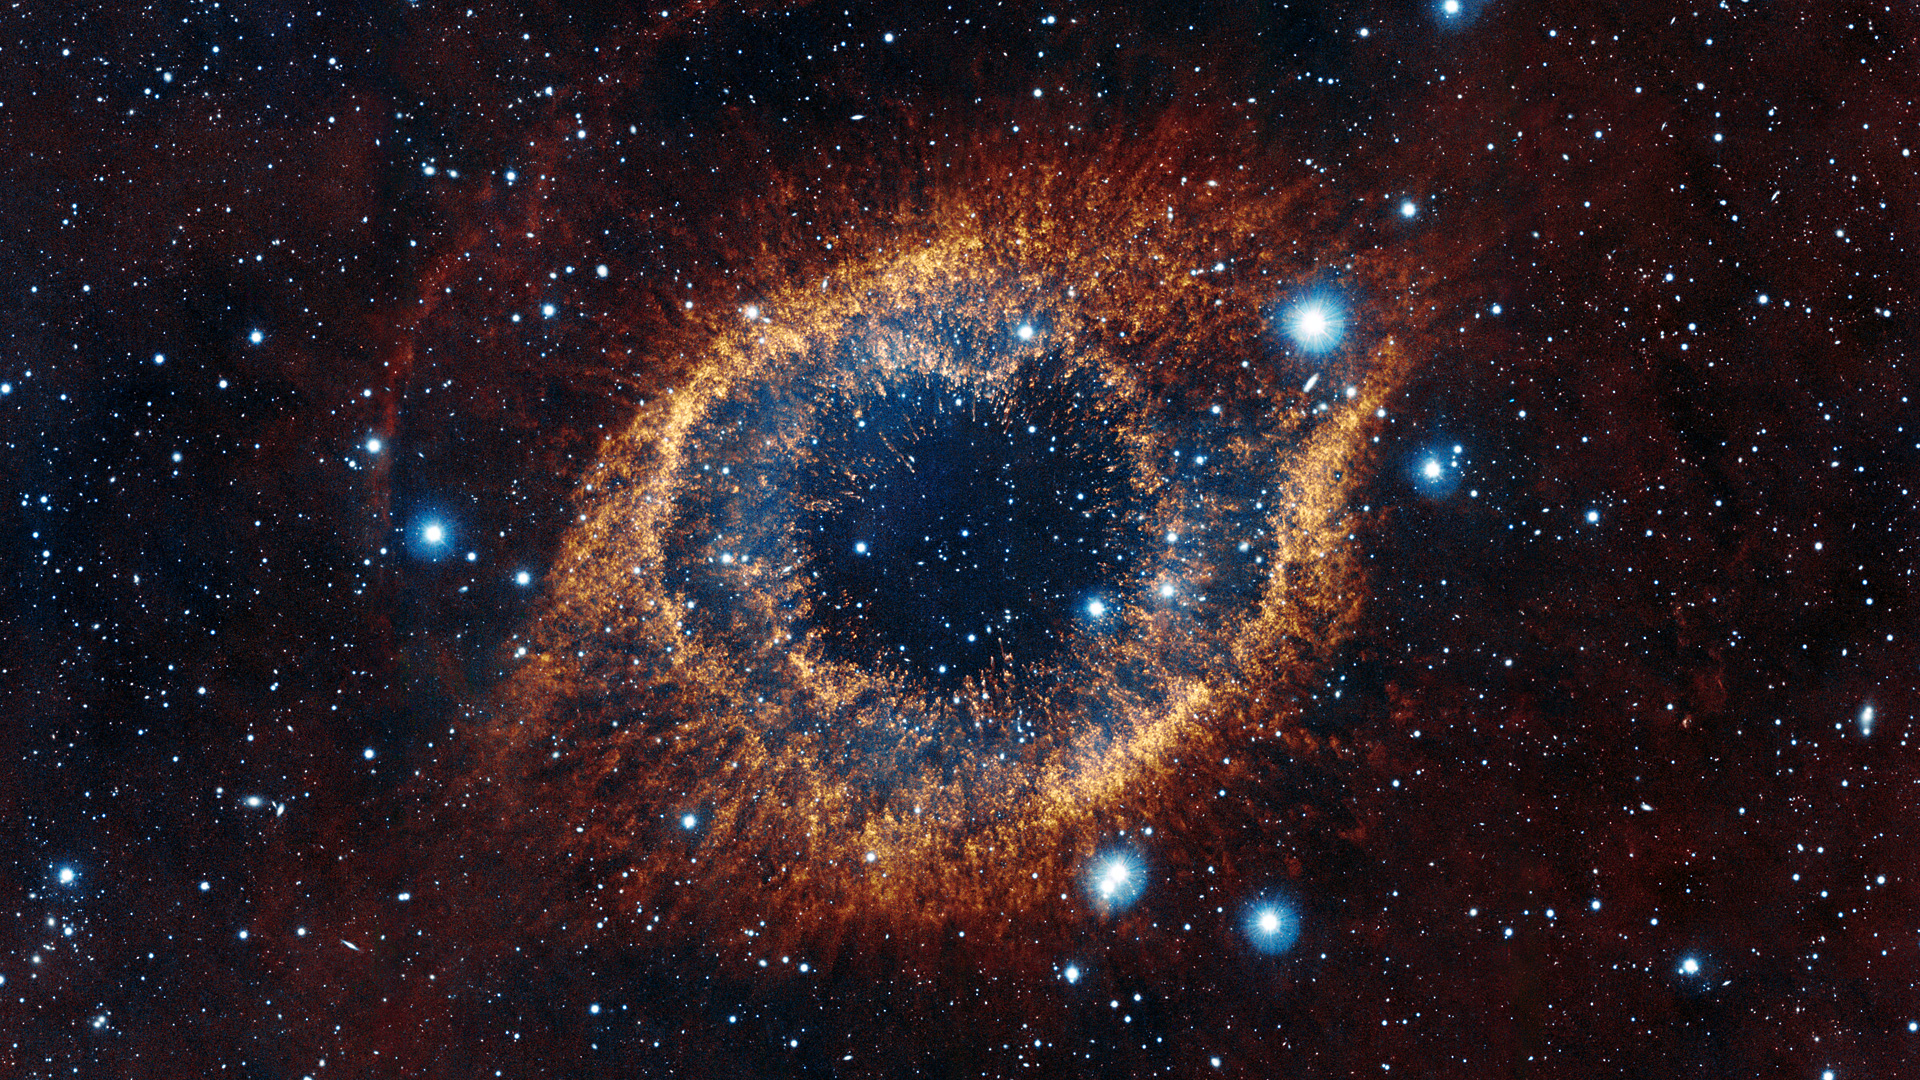 Helix nebula looks like an eye staring back at you, with a dark center and brown outline against a backdrop of stars.